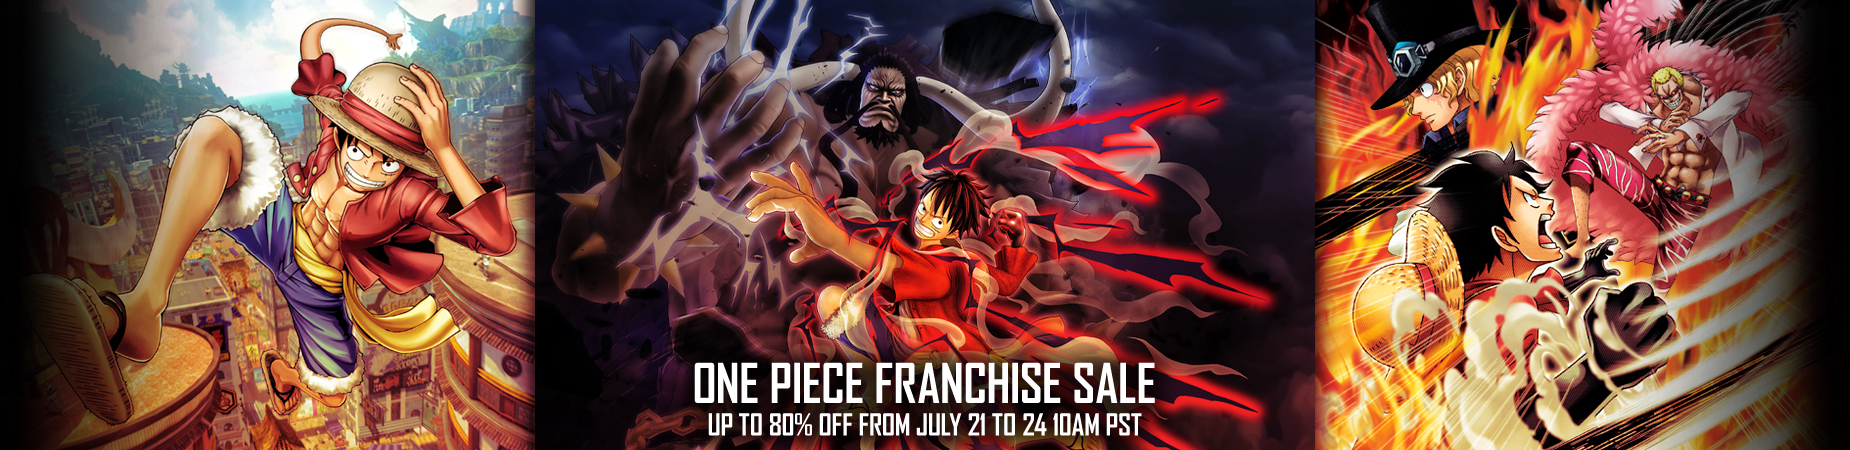 https://store.steampowered.com/sale/one_piece_franchise